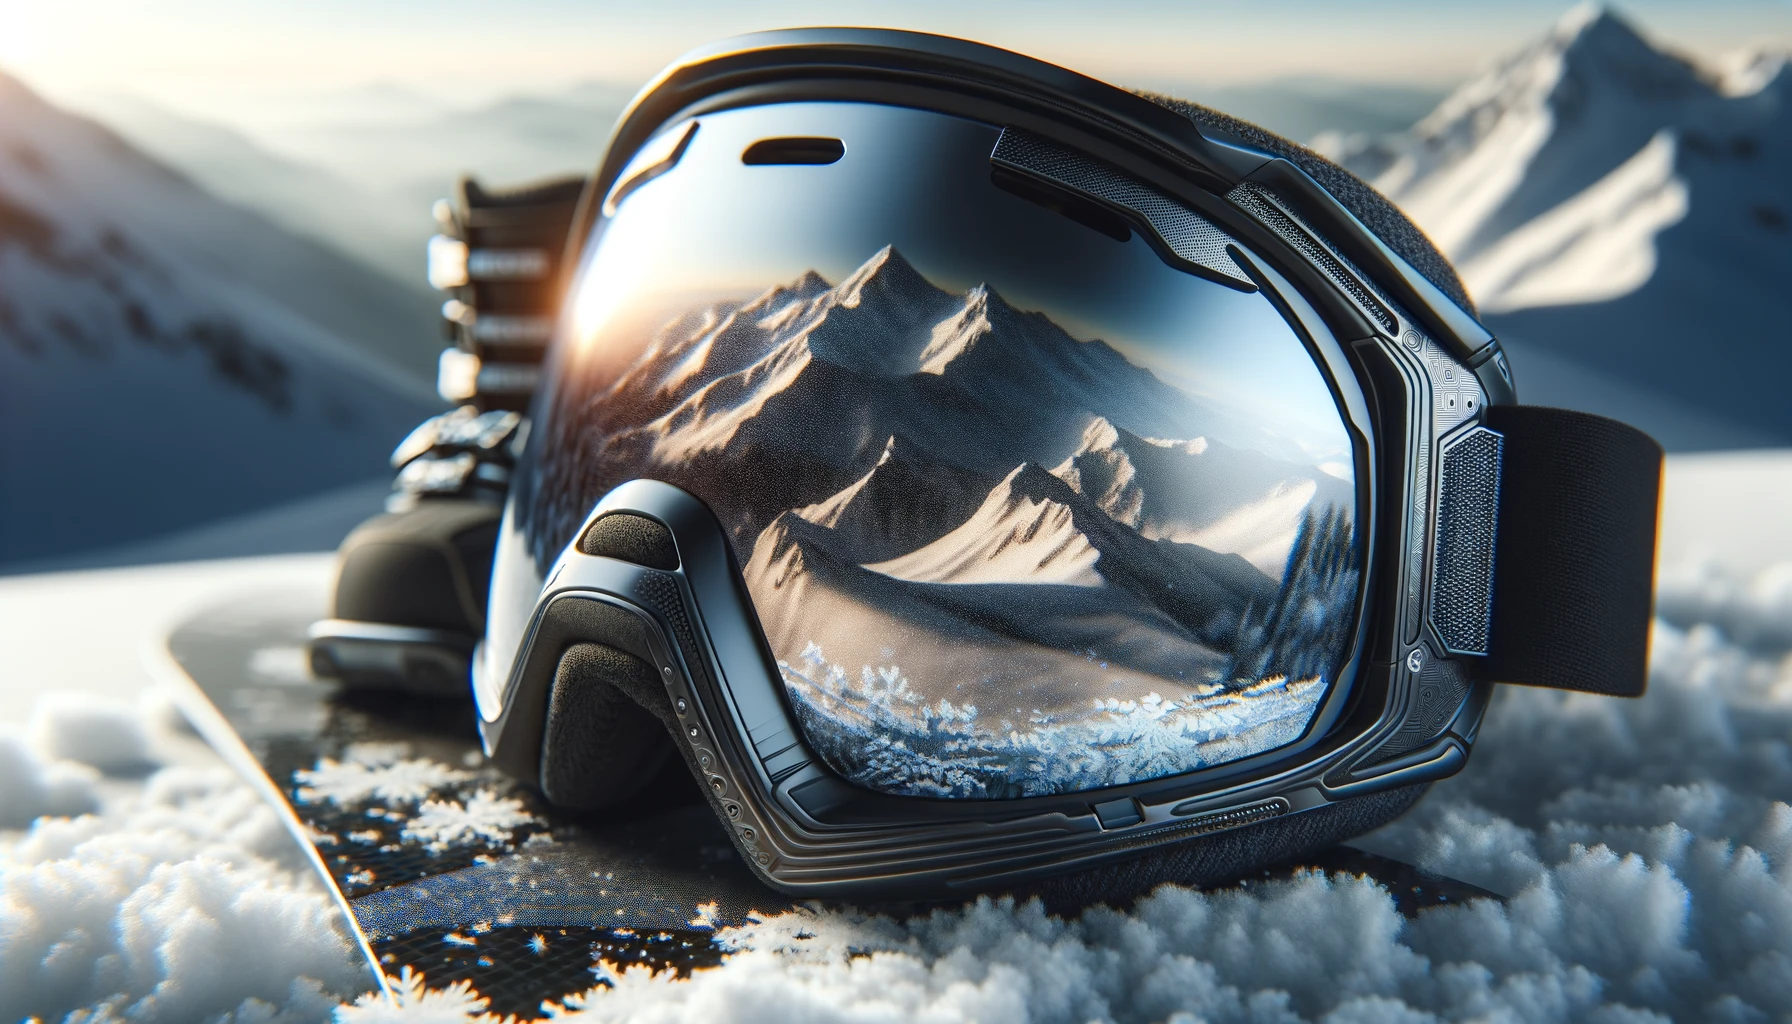 Close-up of snowboard goggles with reflective lenses showcasing a crisp reflection of a snowy mountain landscape, emphasizing the goggles' sleek design and the winter sports ambiance